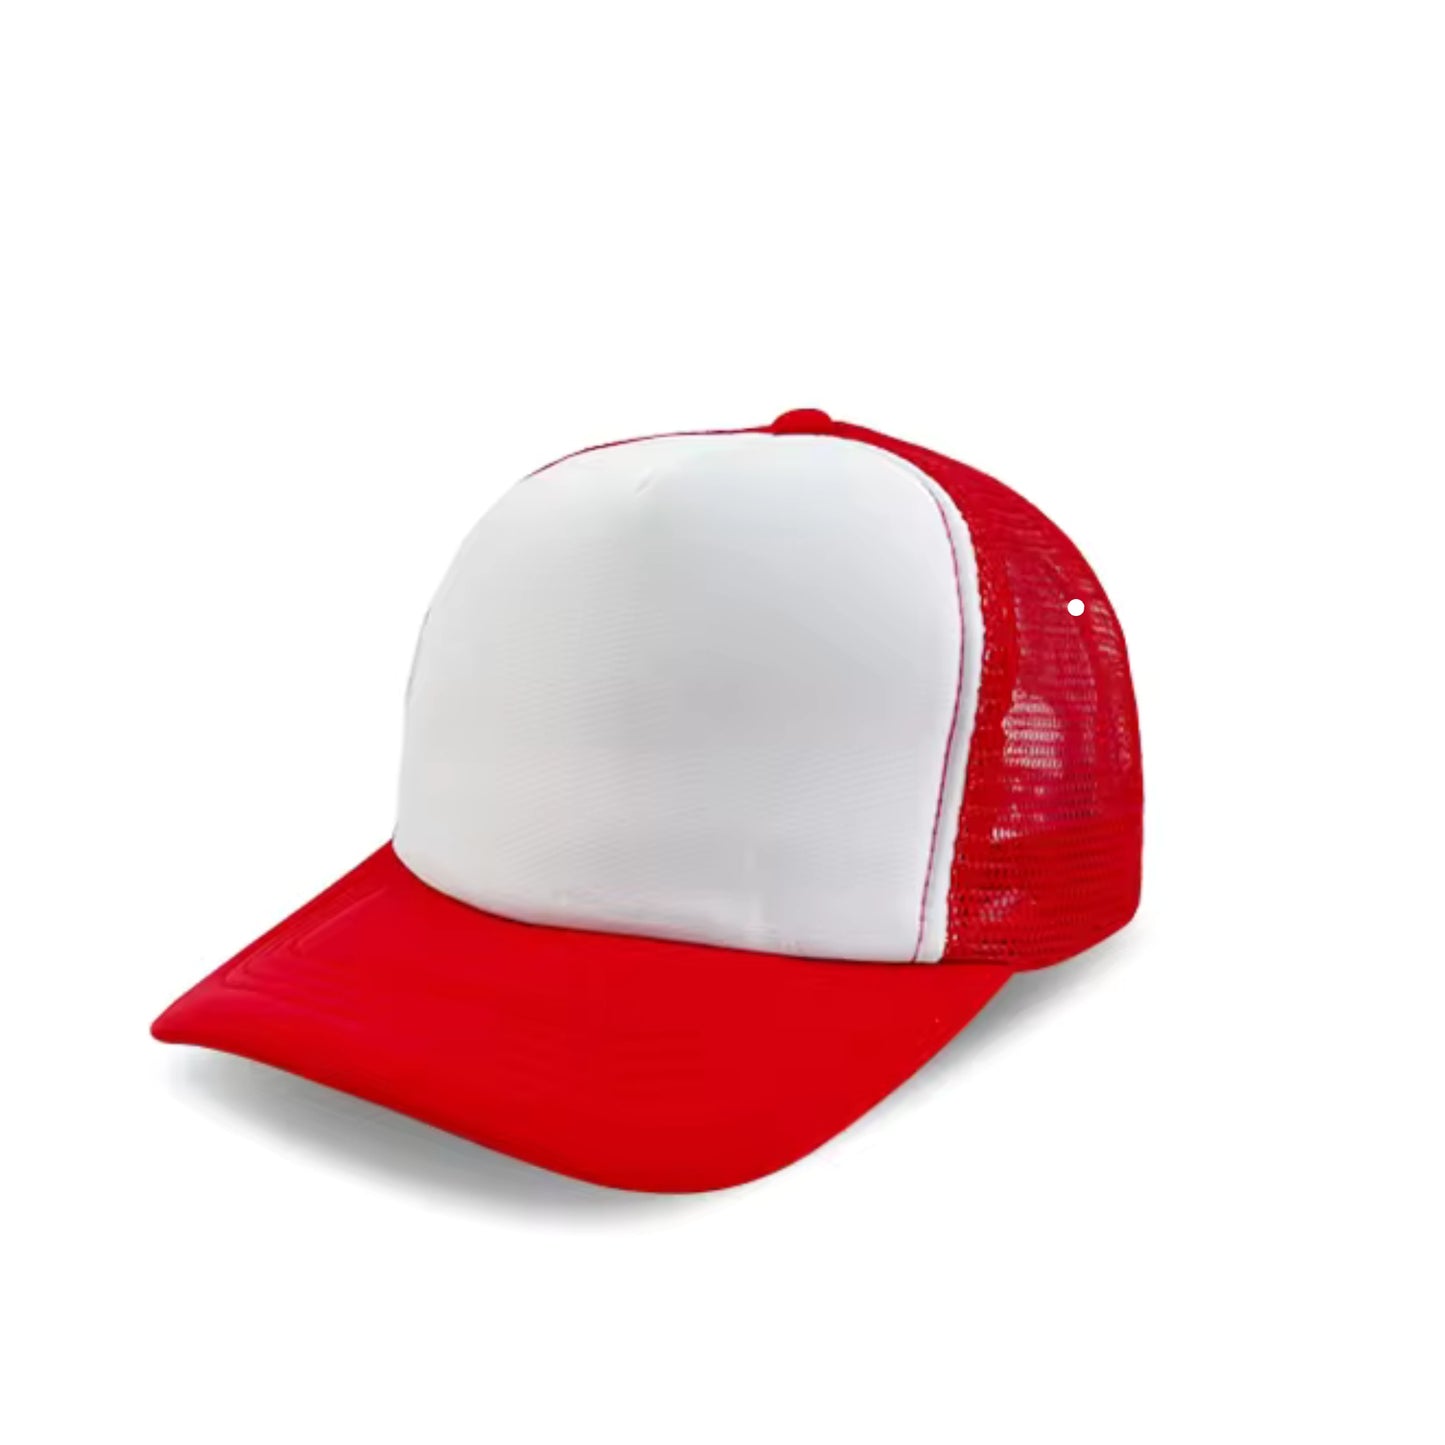 Snapback Hat - Red/White